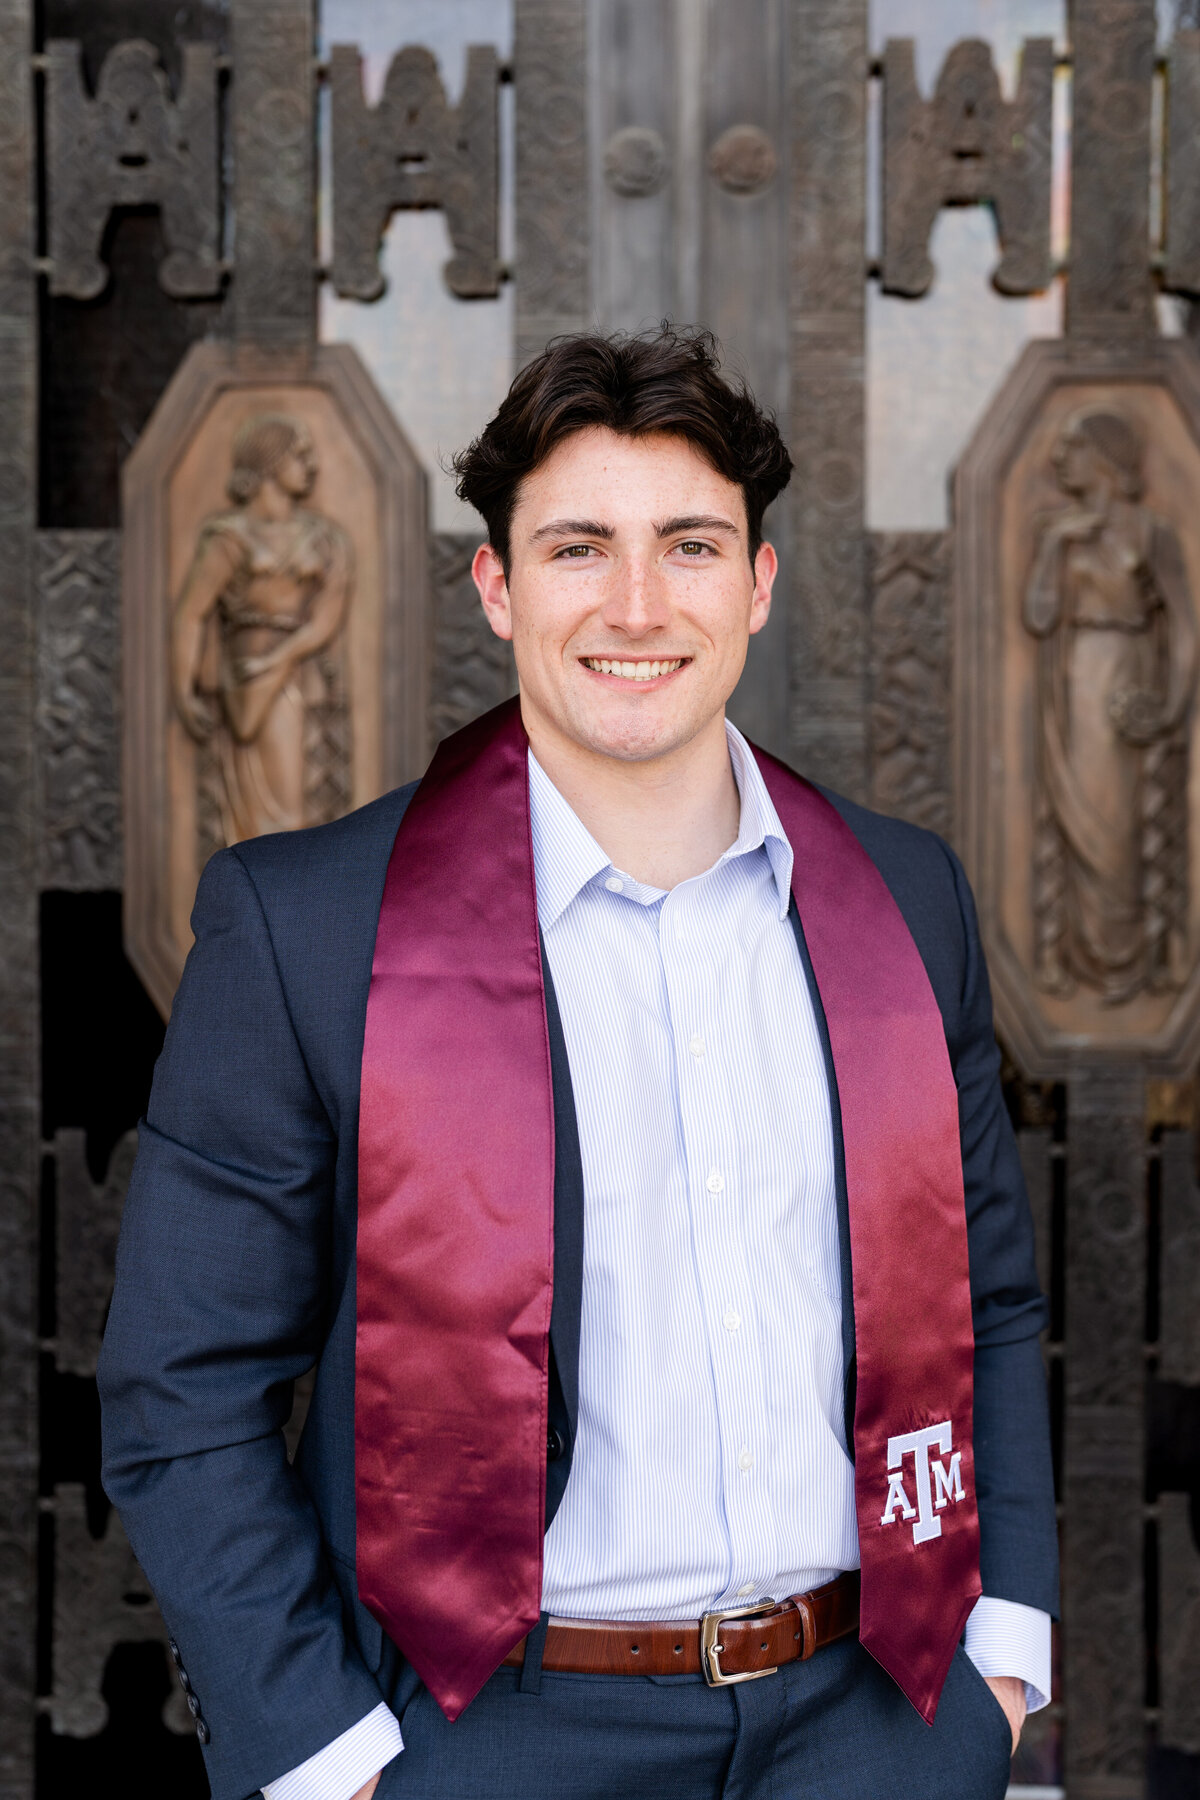 Texas A&M senior guy smiling with hands in pocket and wearing suit while standing in front of Administration Building doors